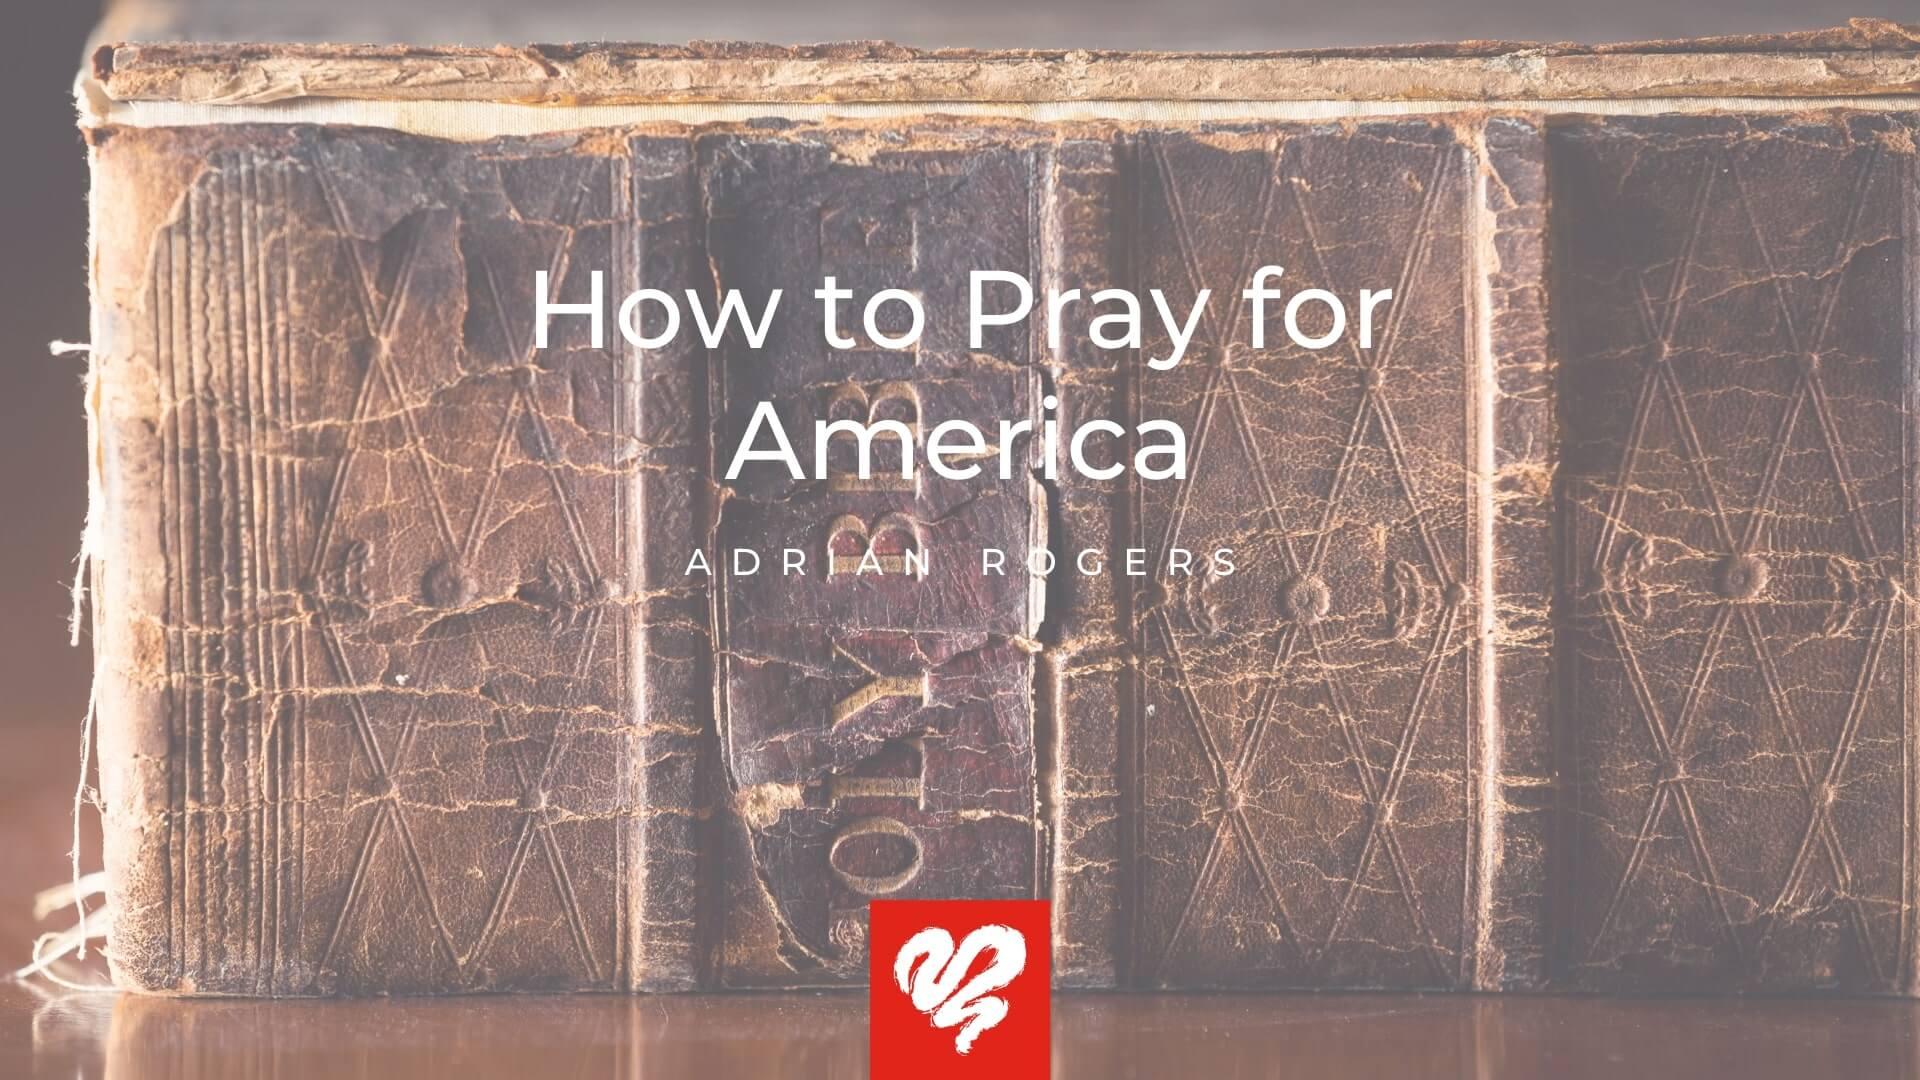 How to Pray for America 10 25 20